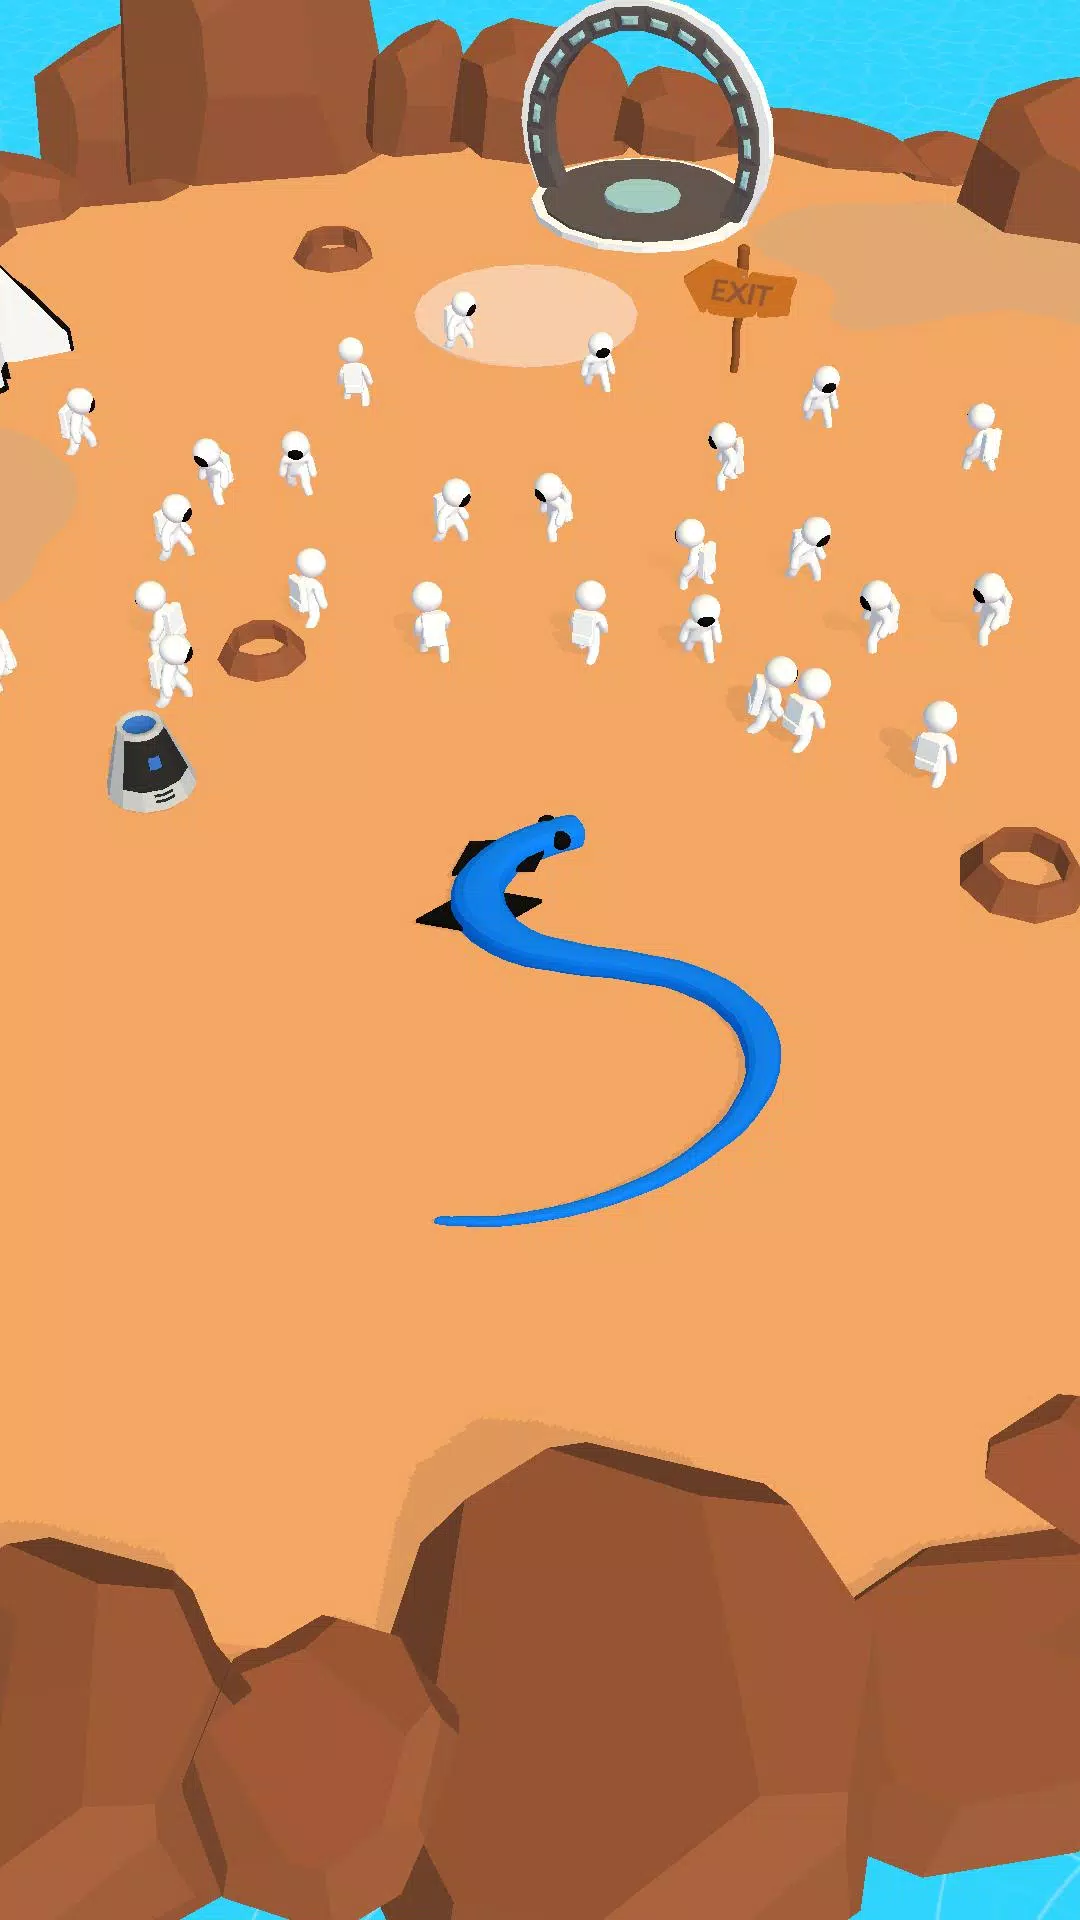 Play Snake Crusher Online for Free on PC & Mobile